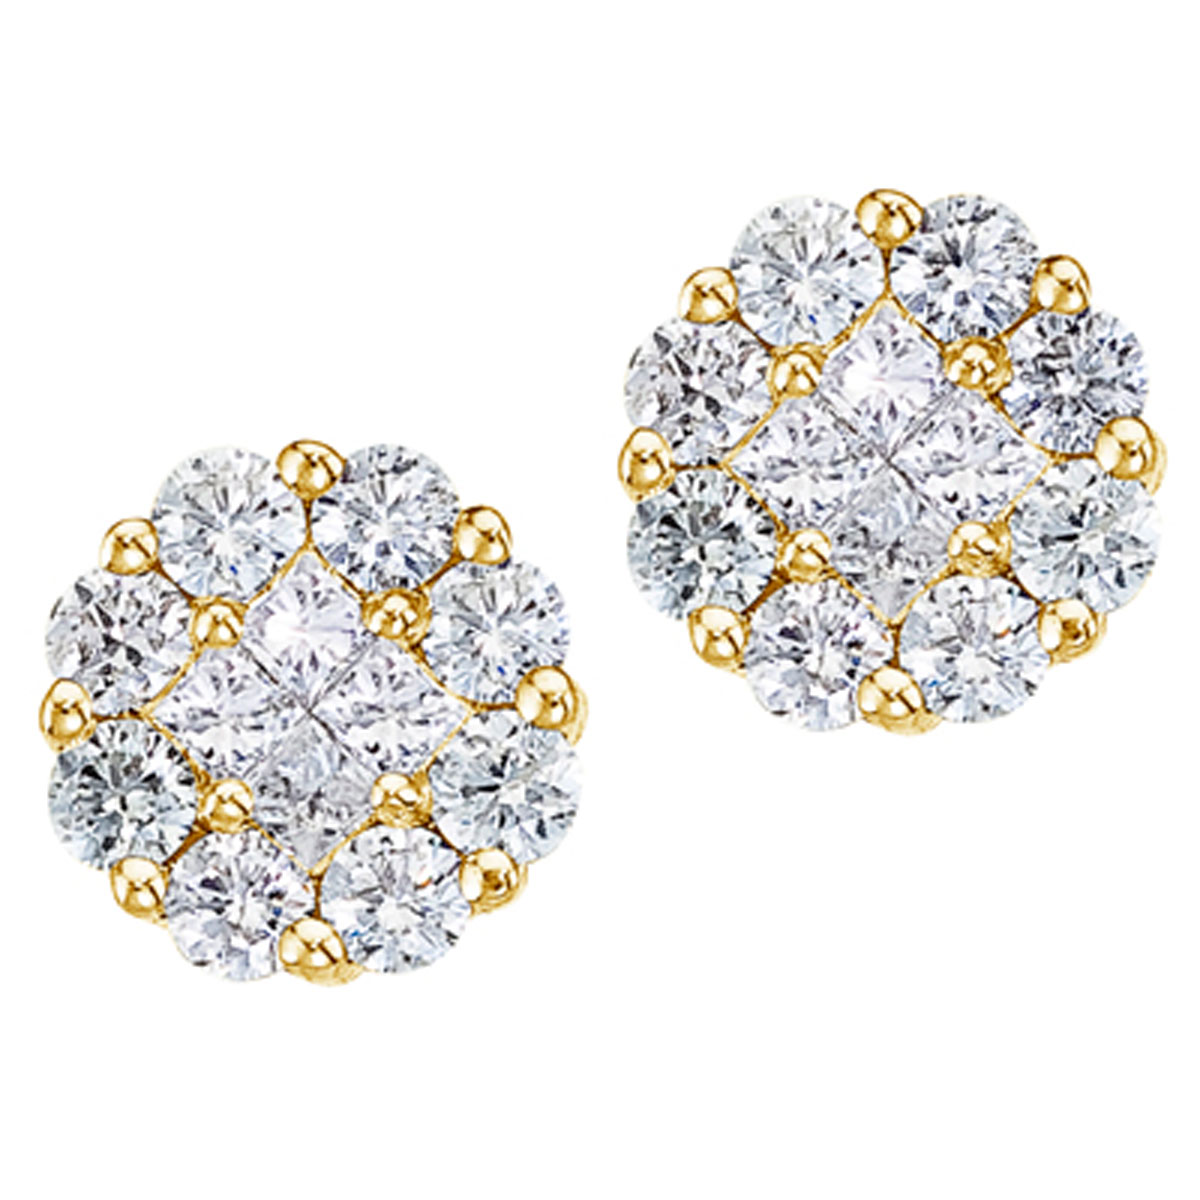 JCX2481: Gorgeous 14k yellow gold earrings with a full carat of shimmering genuine diamonds. Clustaires give all the sparkling elegence of a solitaire at a fraction of the price.